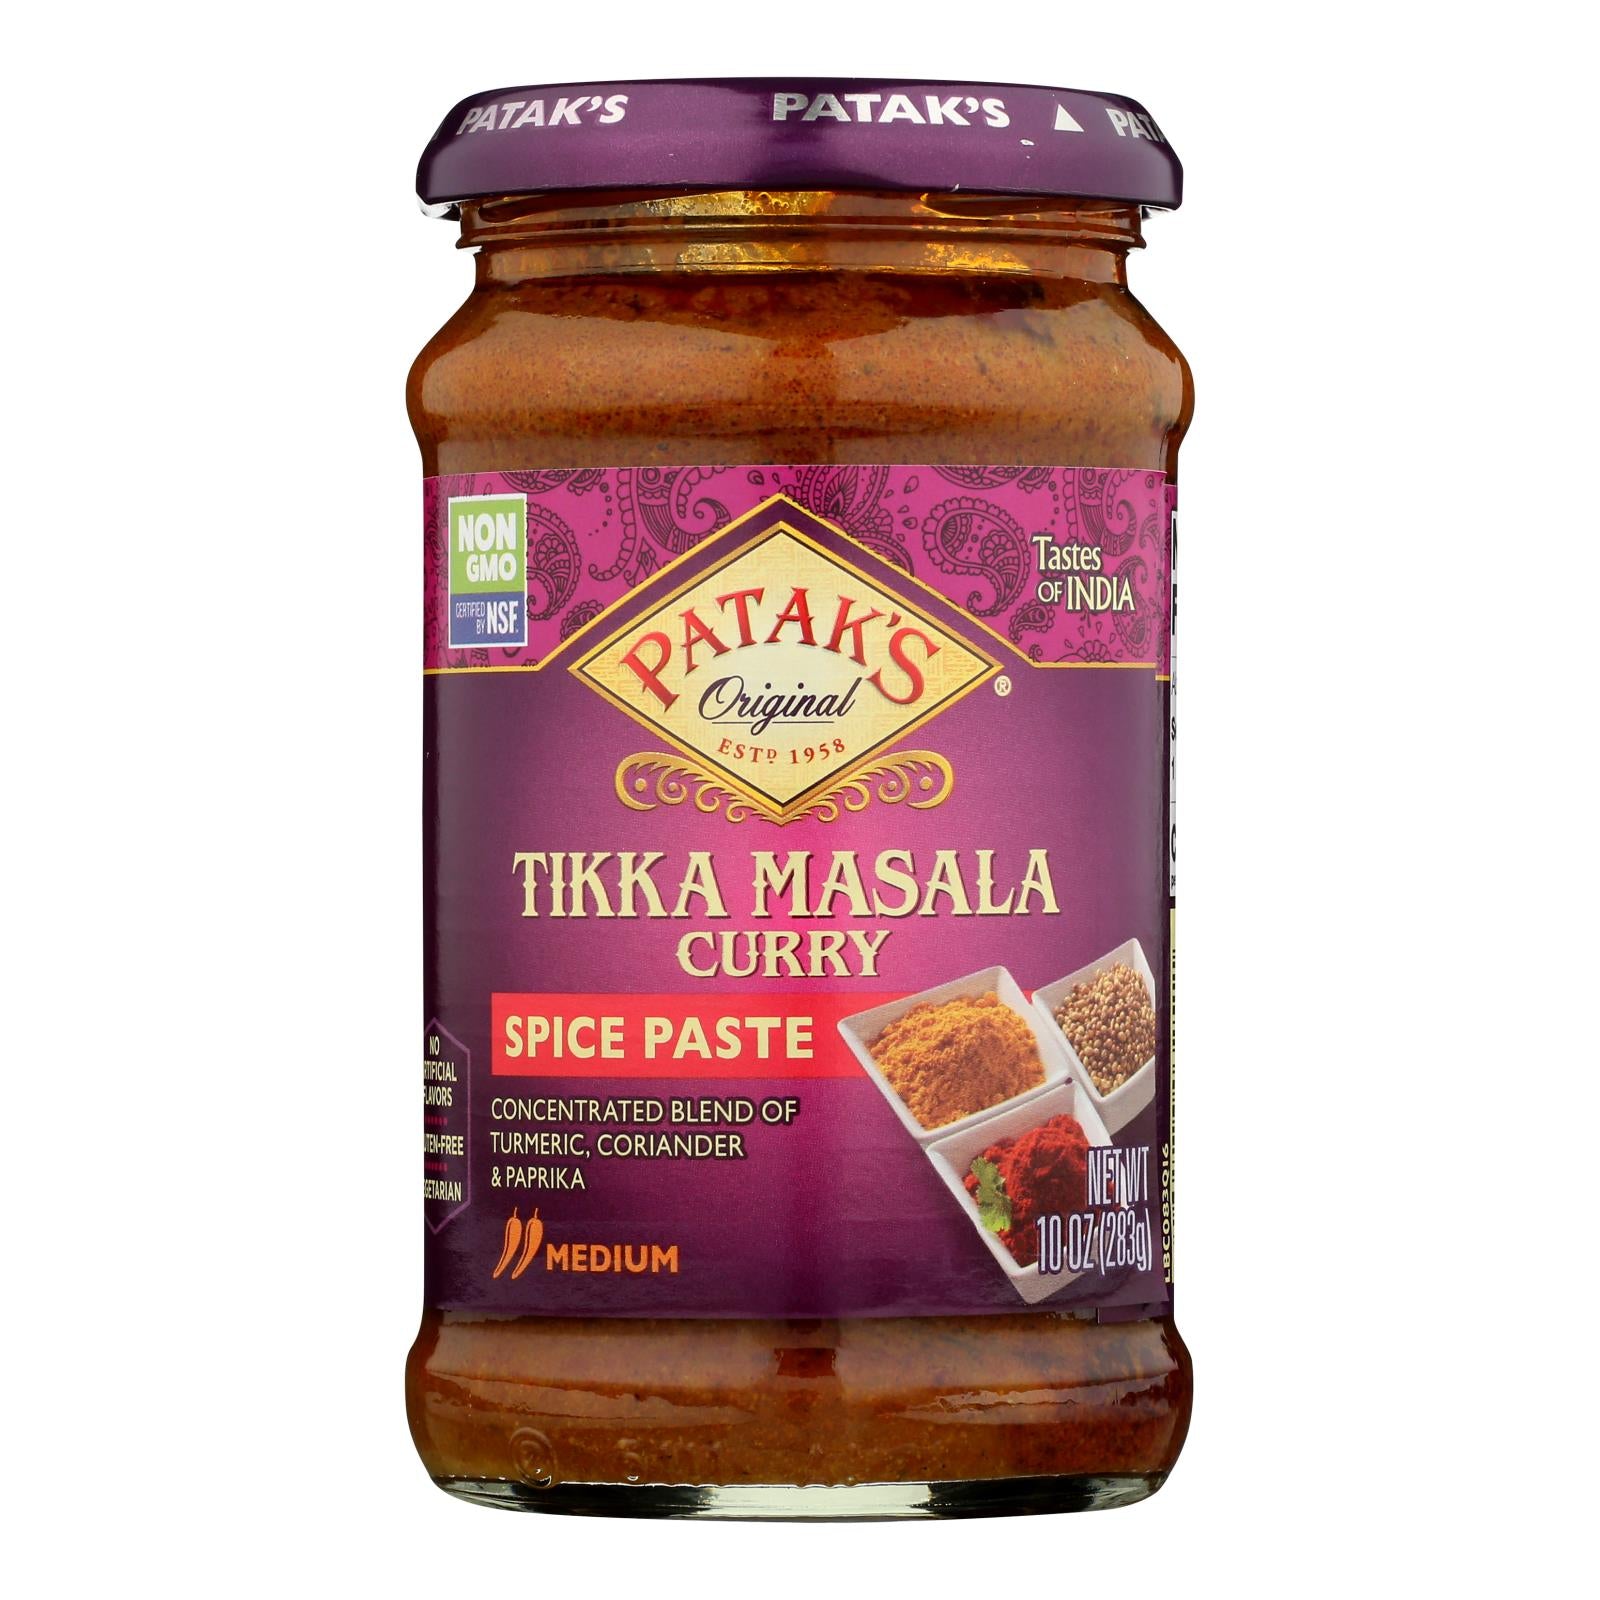 Pataks Concentrated Curry Paste, Tikka Masala Medium  - Case Of 6 - 10 Oz